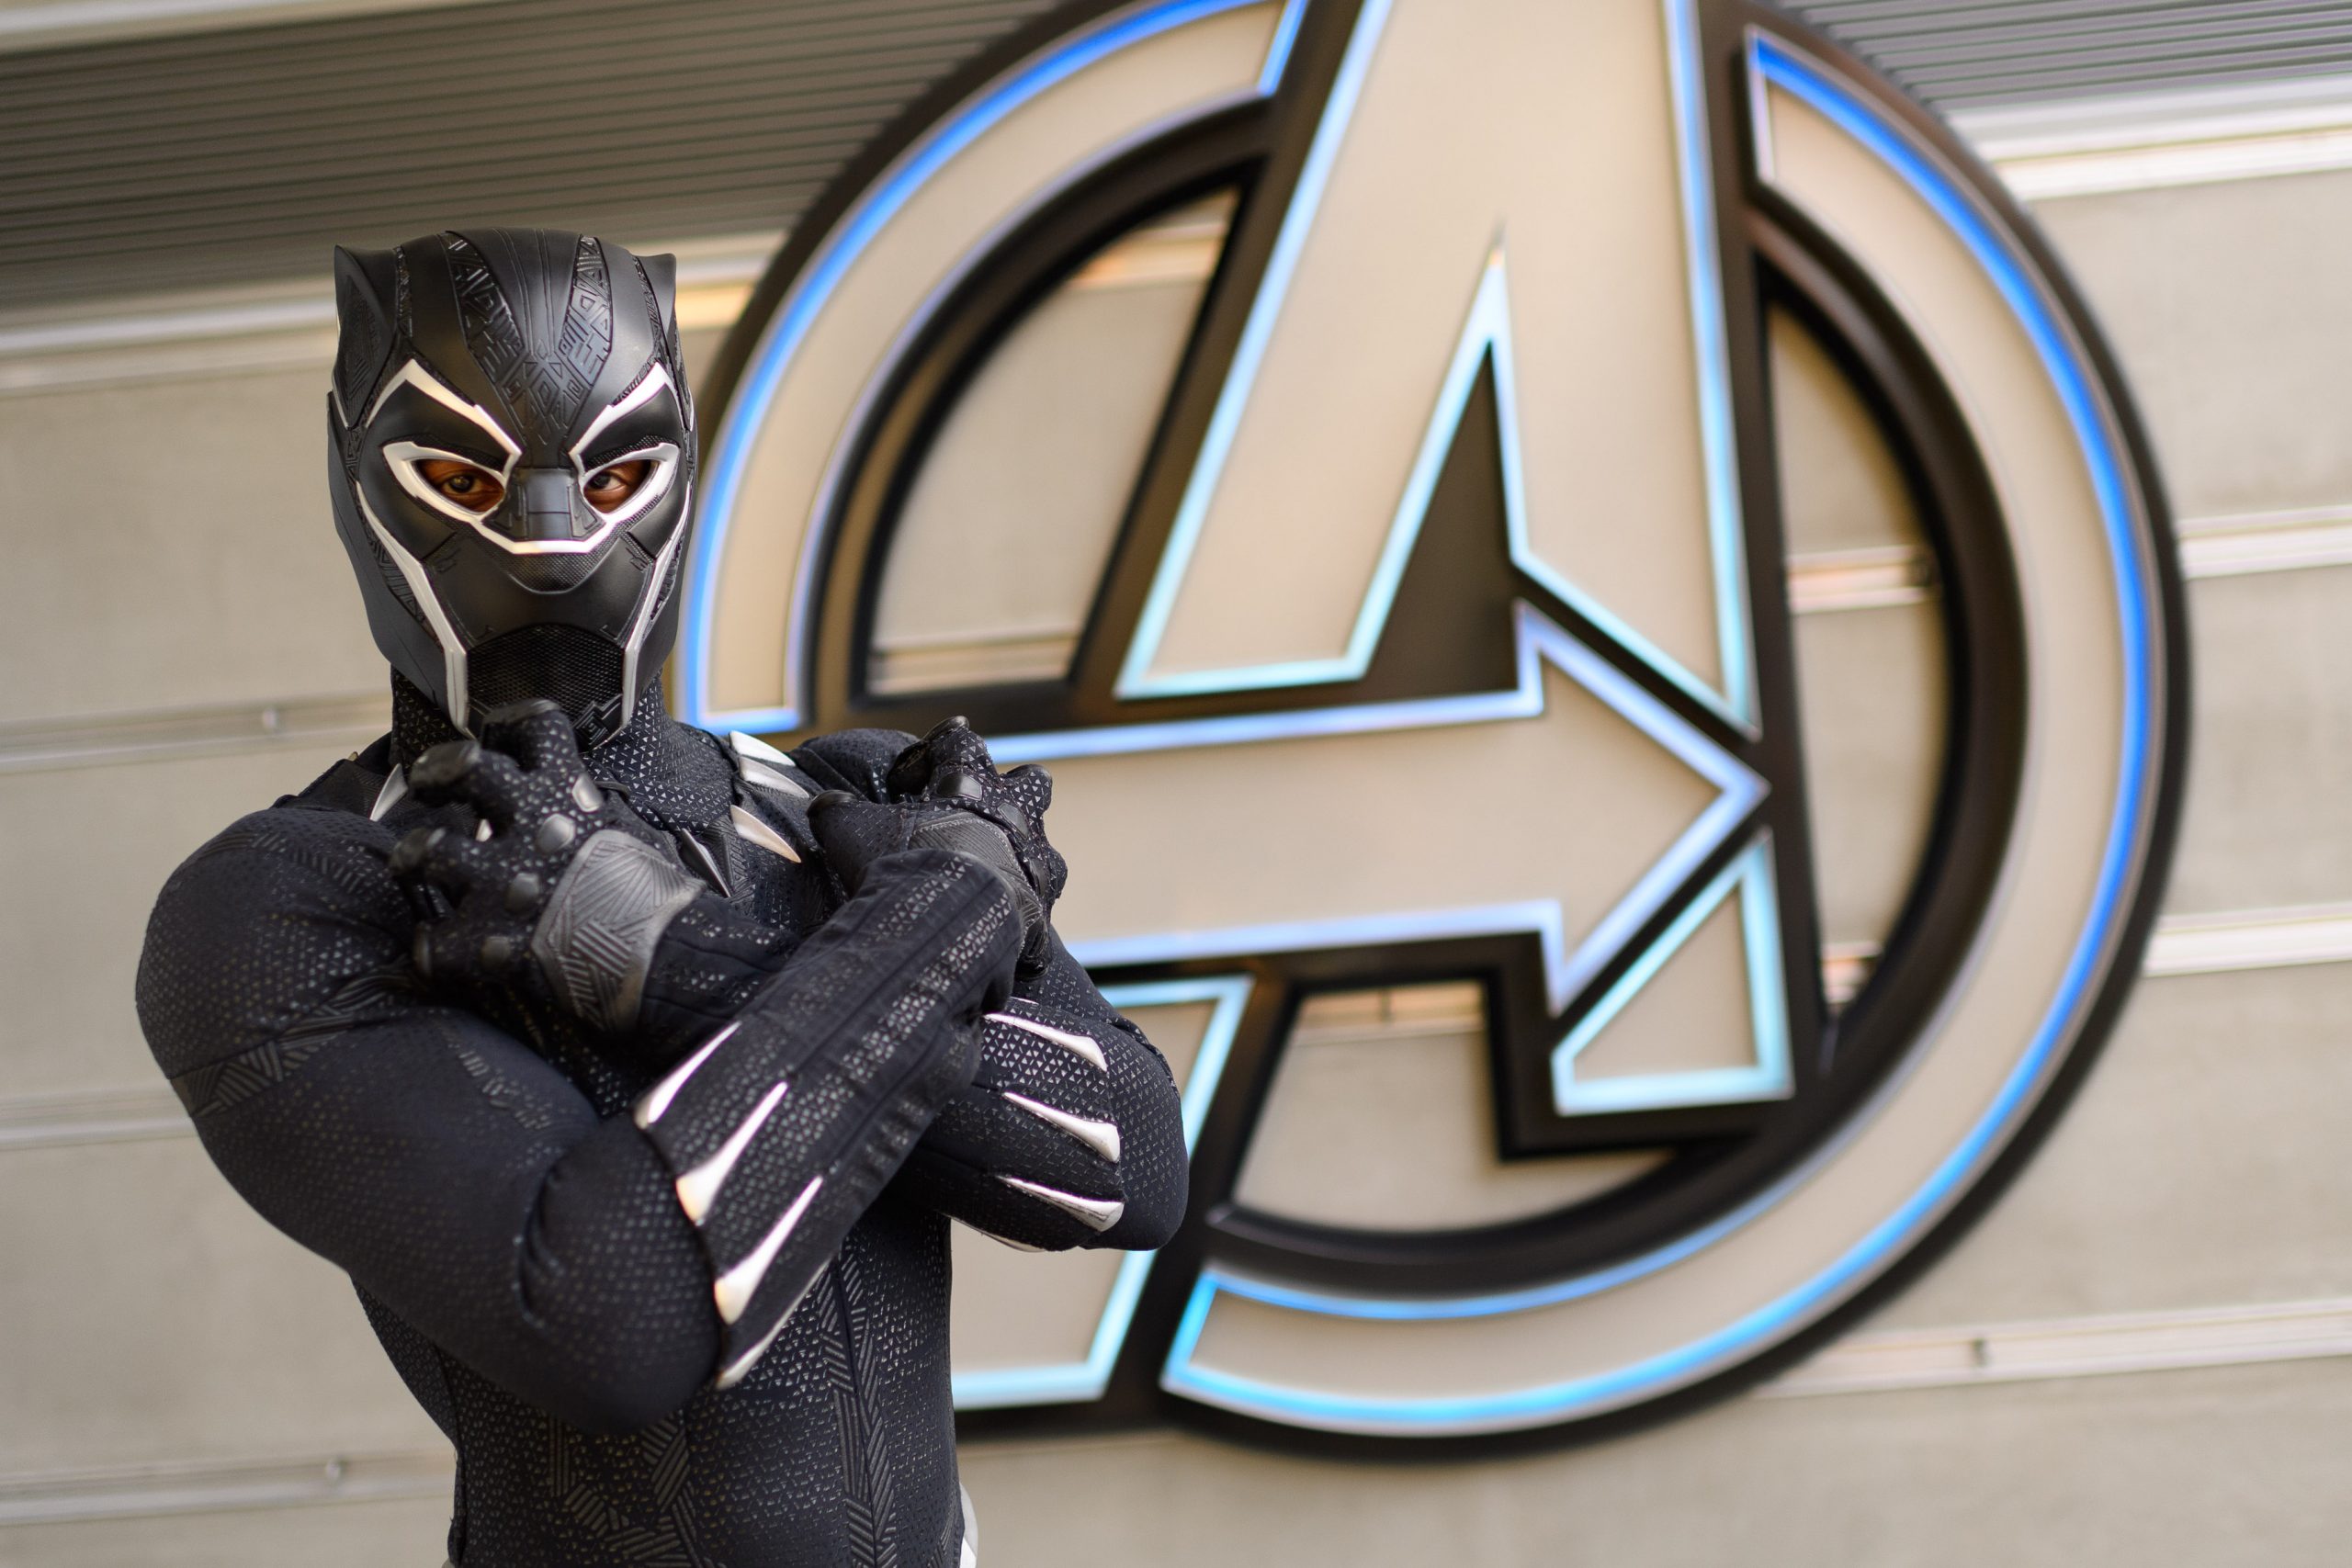 When trouble ensues at Avengers Campus at Disney California Adventure Park, out of nowhere EarthÕs Mightiest Heroes arrive to save the day. Guests may see Black Panther, Black Widow or Captain America spring into action, heading off the threat from these foes. (Richard Harbaugh/Disneyland Resort)